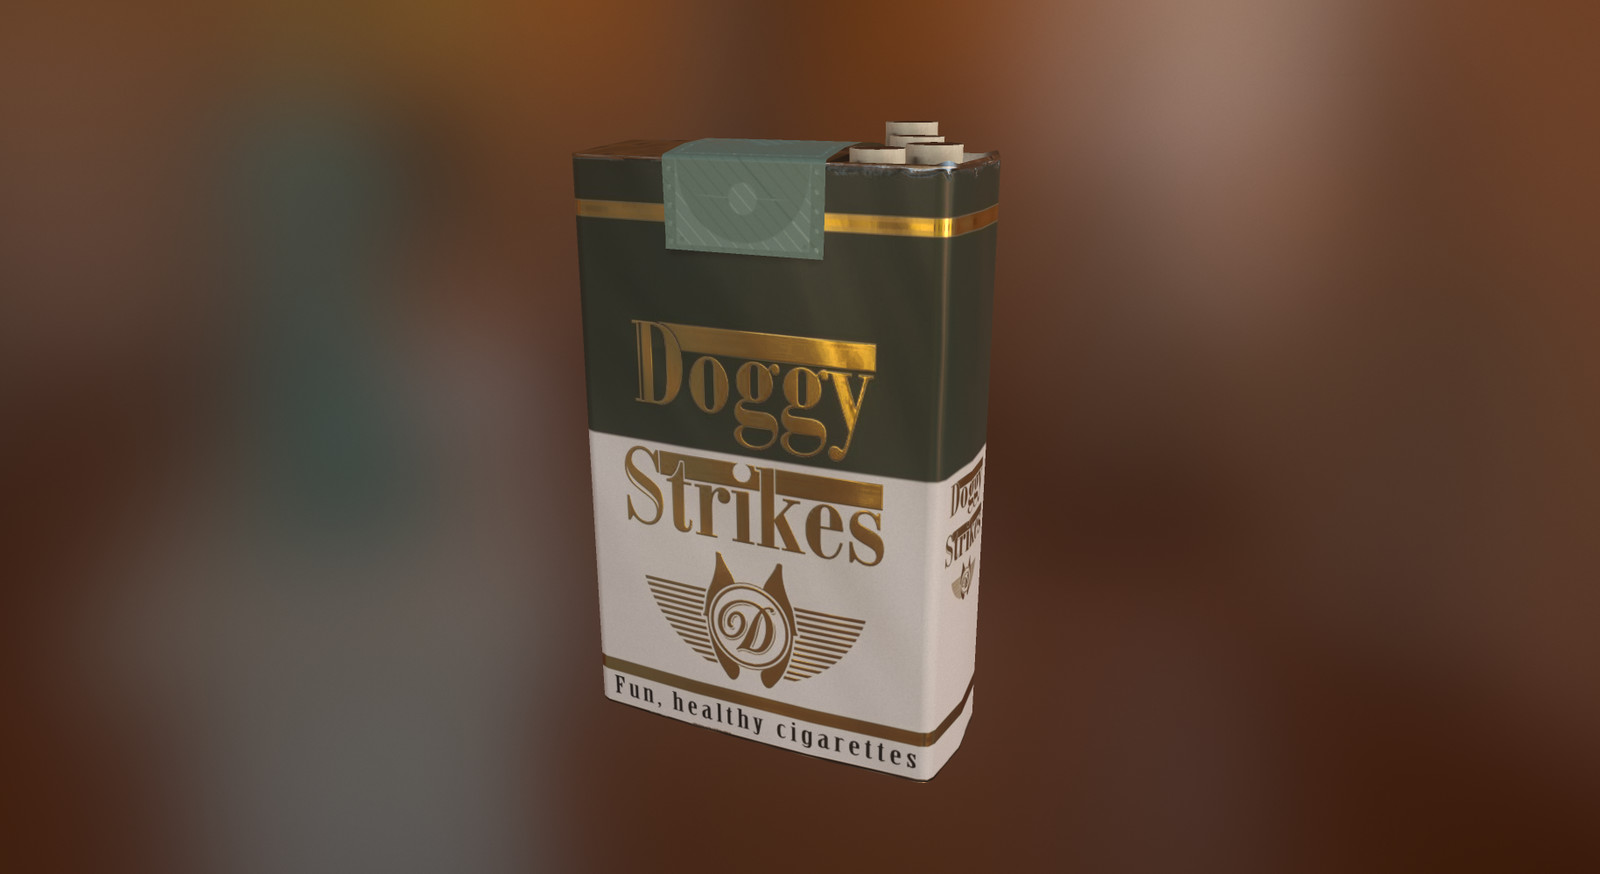 Final version of the 'Doggy Strikes' cigarette pack rendered in Marmoset